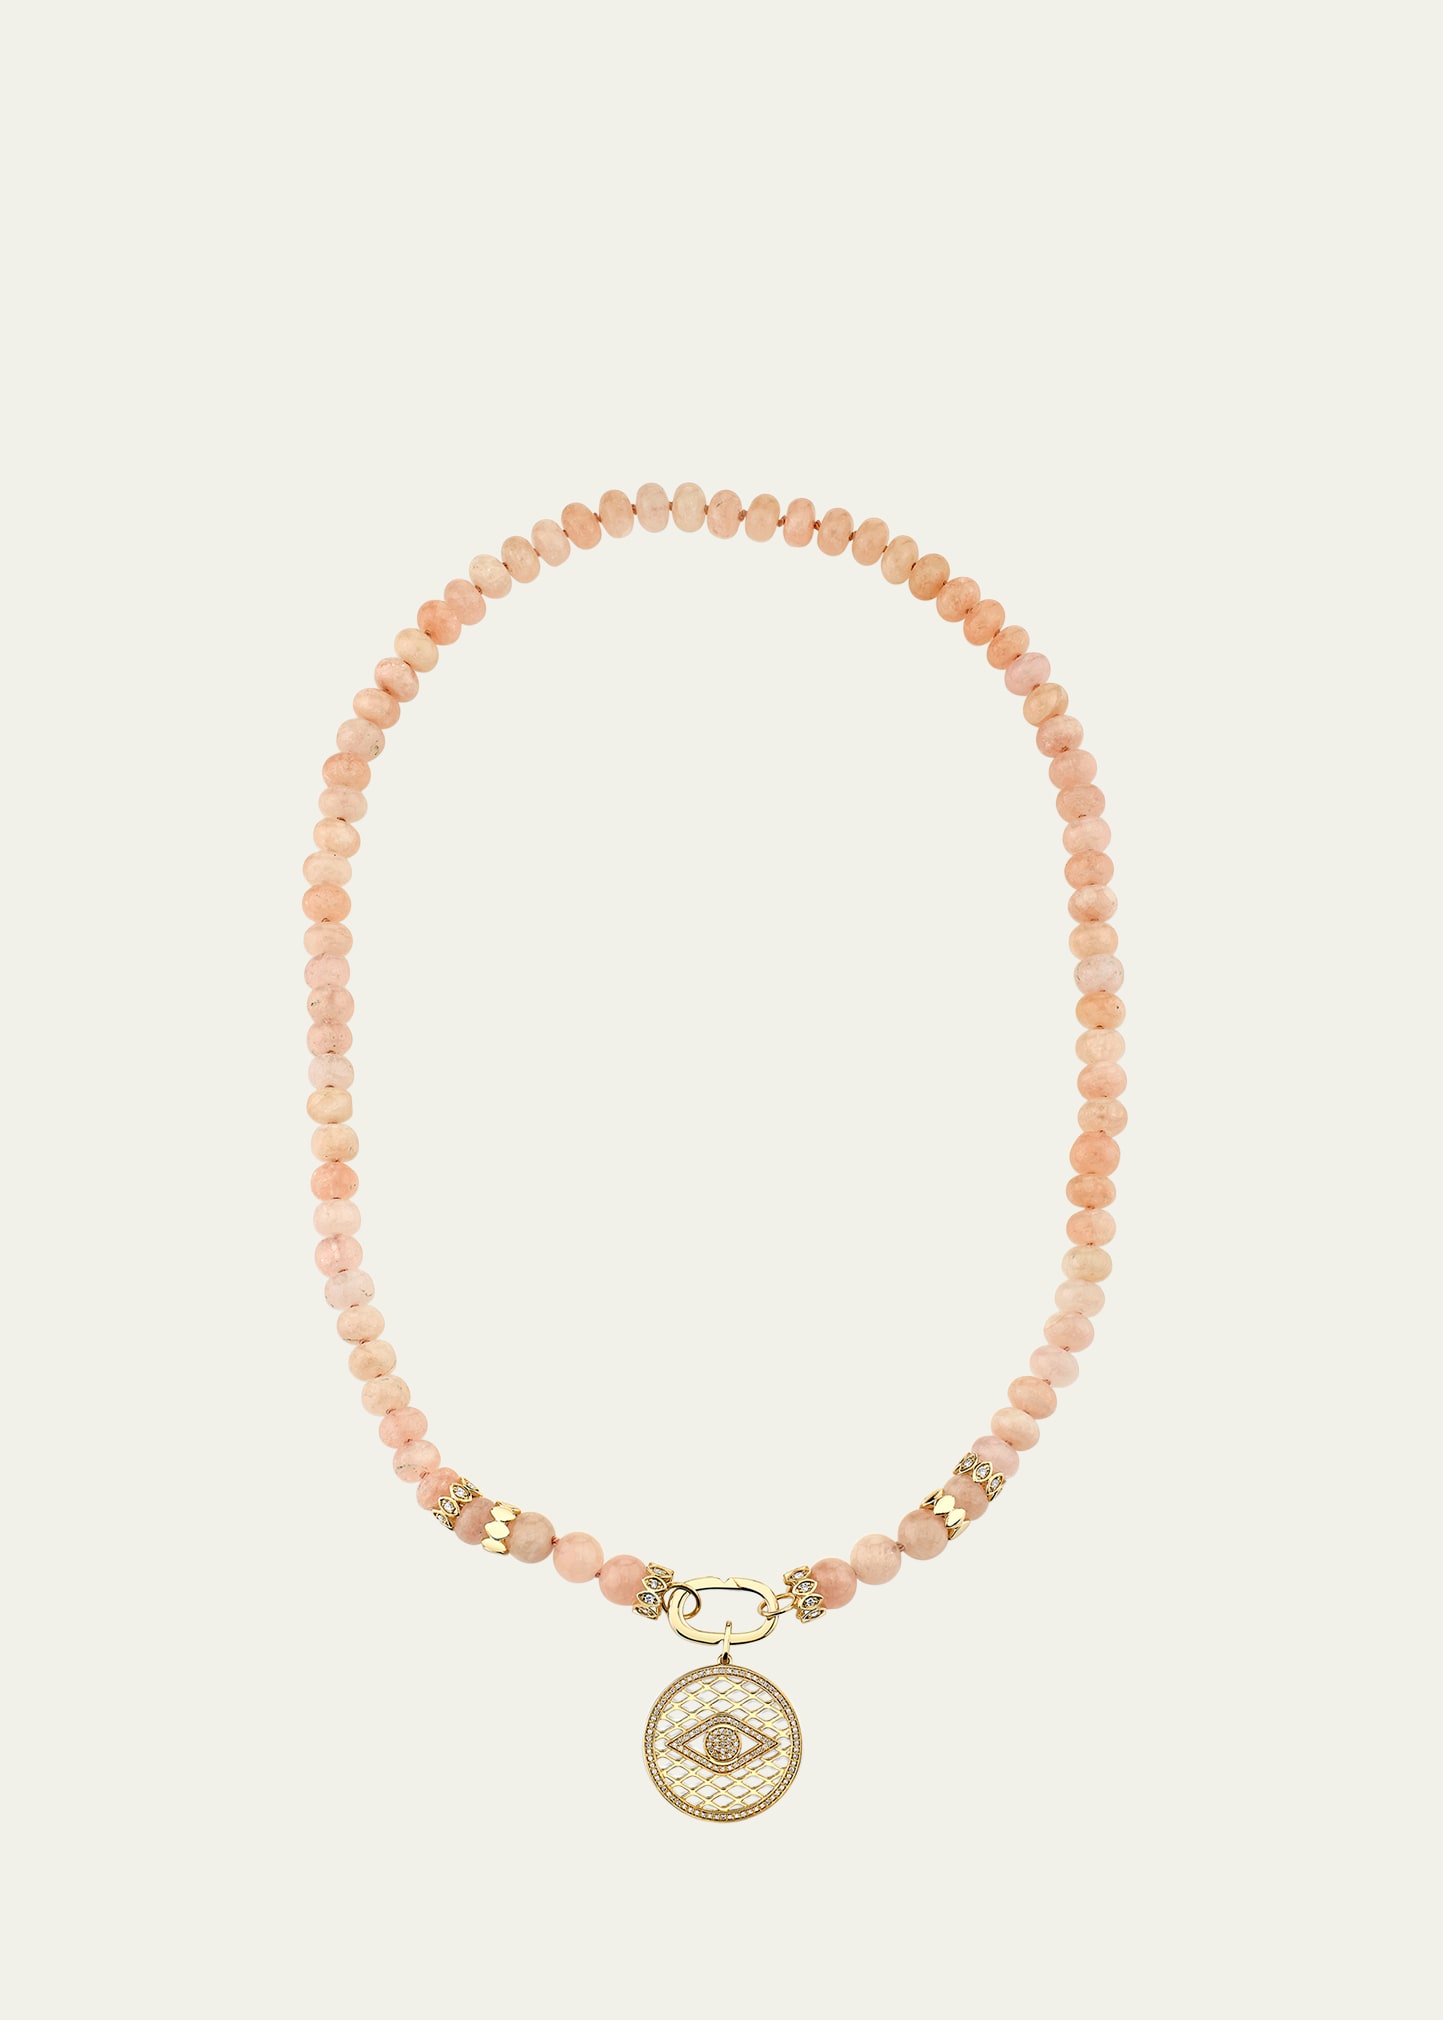 SYDNEY EVAN 14K YELLOW GOLD MULTI MARQUISE RONDELLE MORGANITE BEADED NECKLACE WITH CLIP-ON FISHNET CHARM